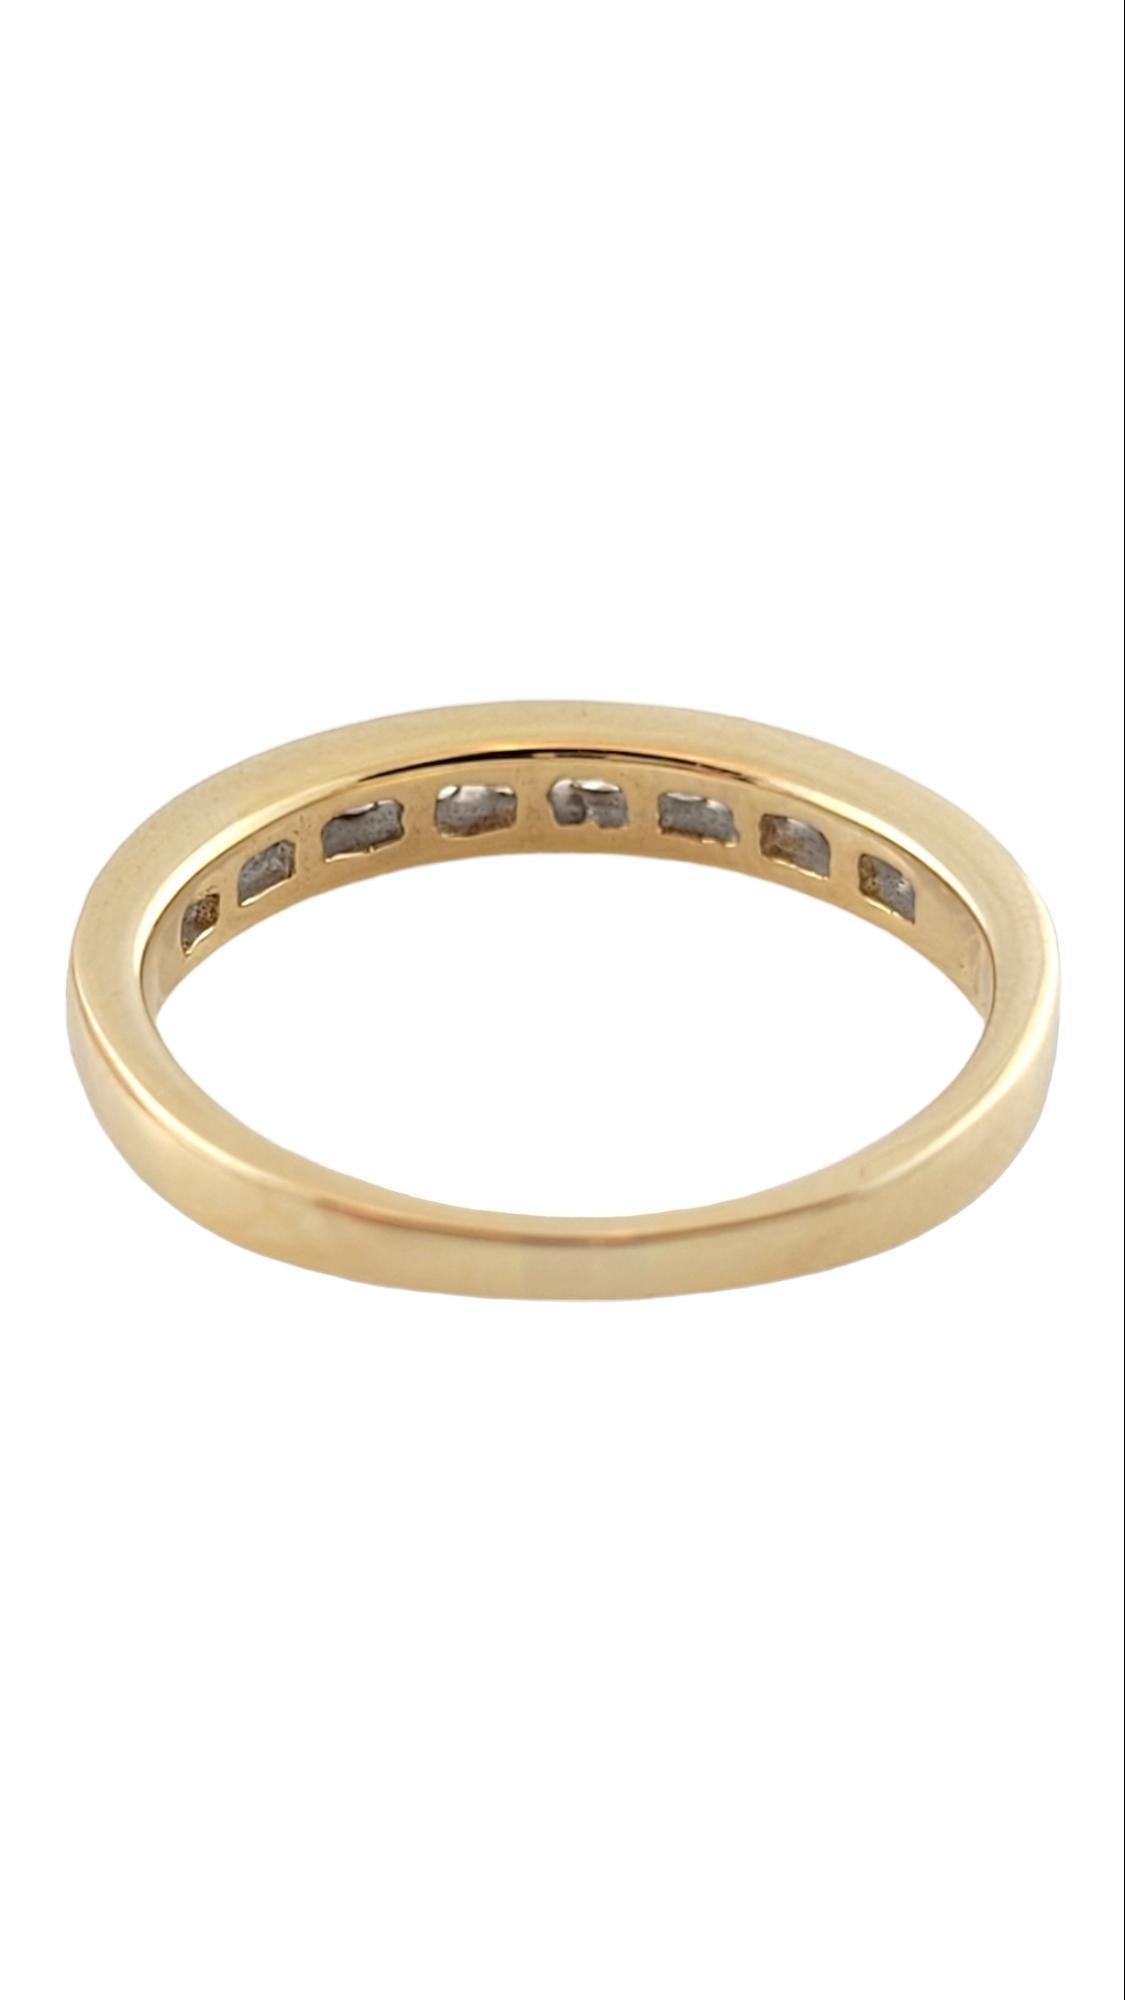 14K Yellow Gold Diamond Band Size 6.25 #15890 In Good Condition For Sale In Washington Depot, CT